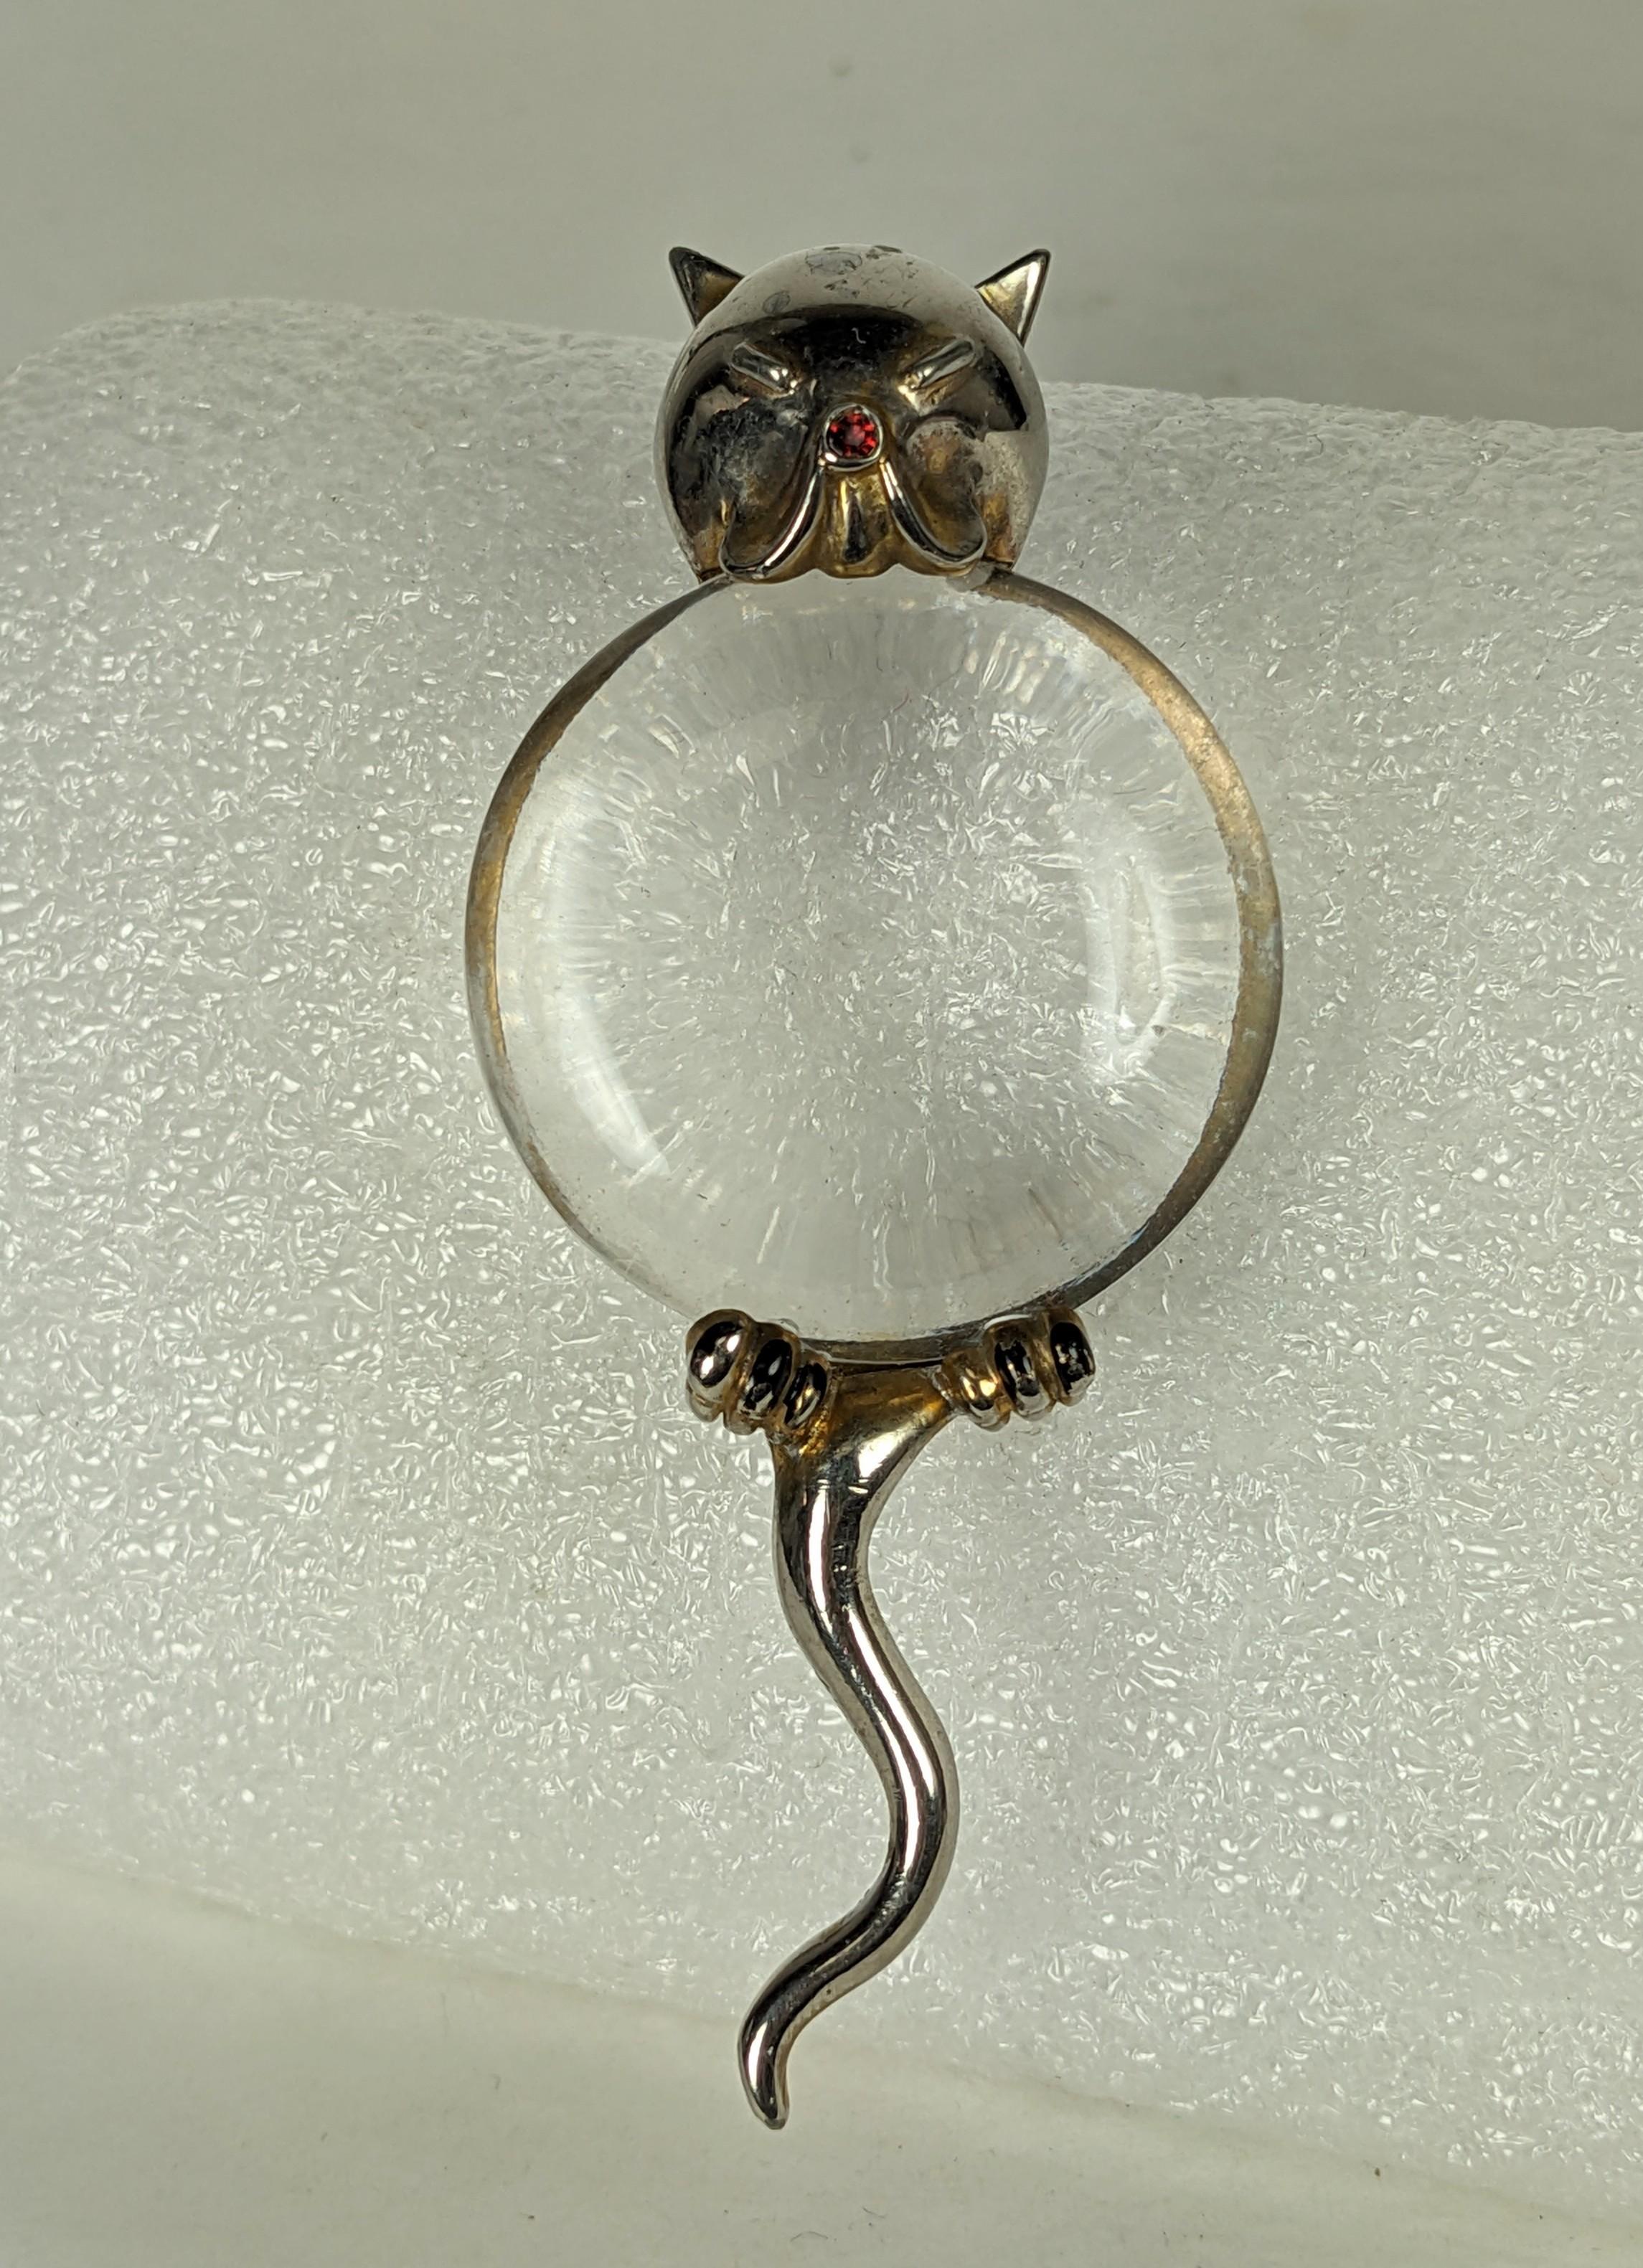 Charming, collectible Art Deco Jelly Belly Cat Brooch from the 1930's. Originally gold, it has worn to a rhodium finish so essentially silver toned. Lucite clear belly. 1930's USA. Unsigned. 3.5